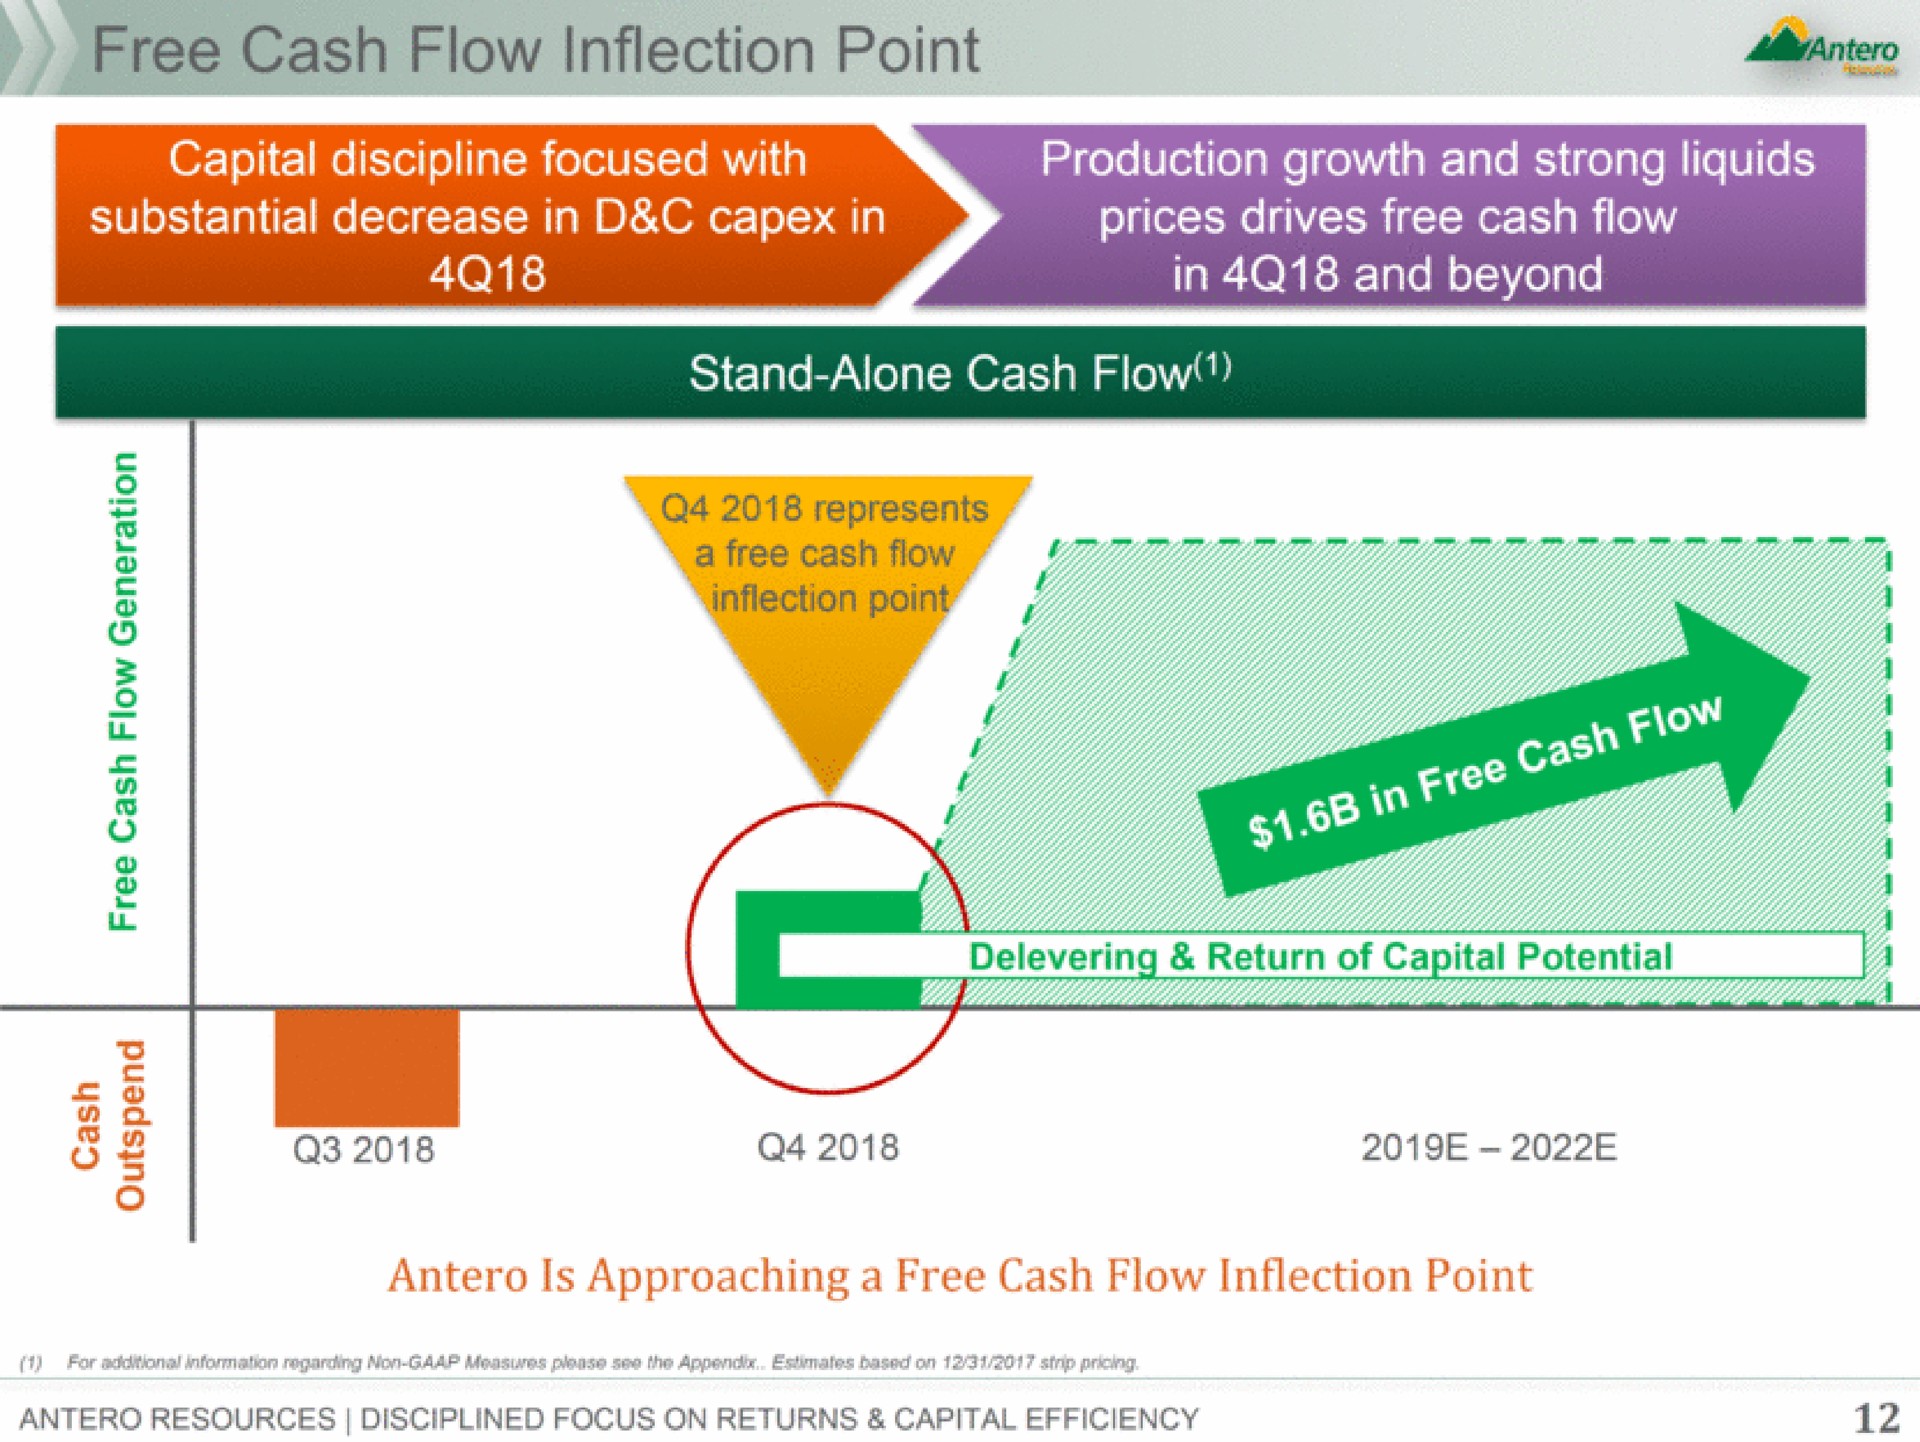 flow inflection point capital discipline focused with substantial decrease production growth and strong liquids prices drives free cash flow | Antero Midstream Partners